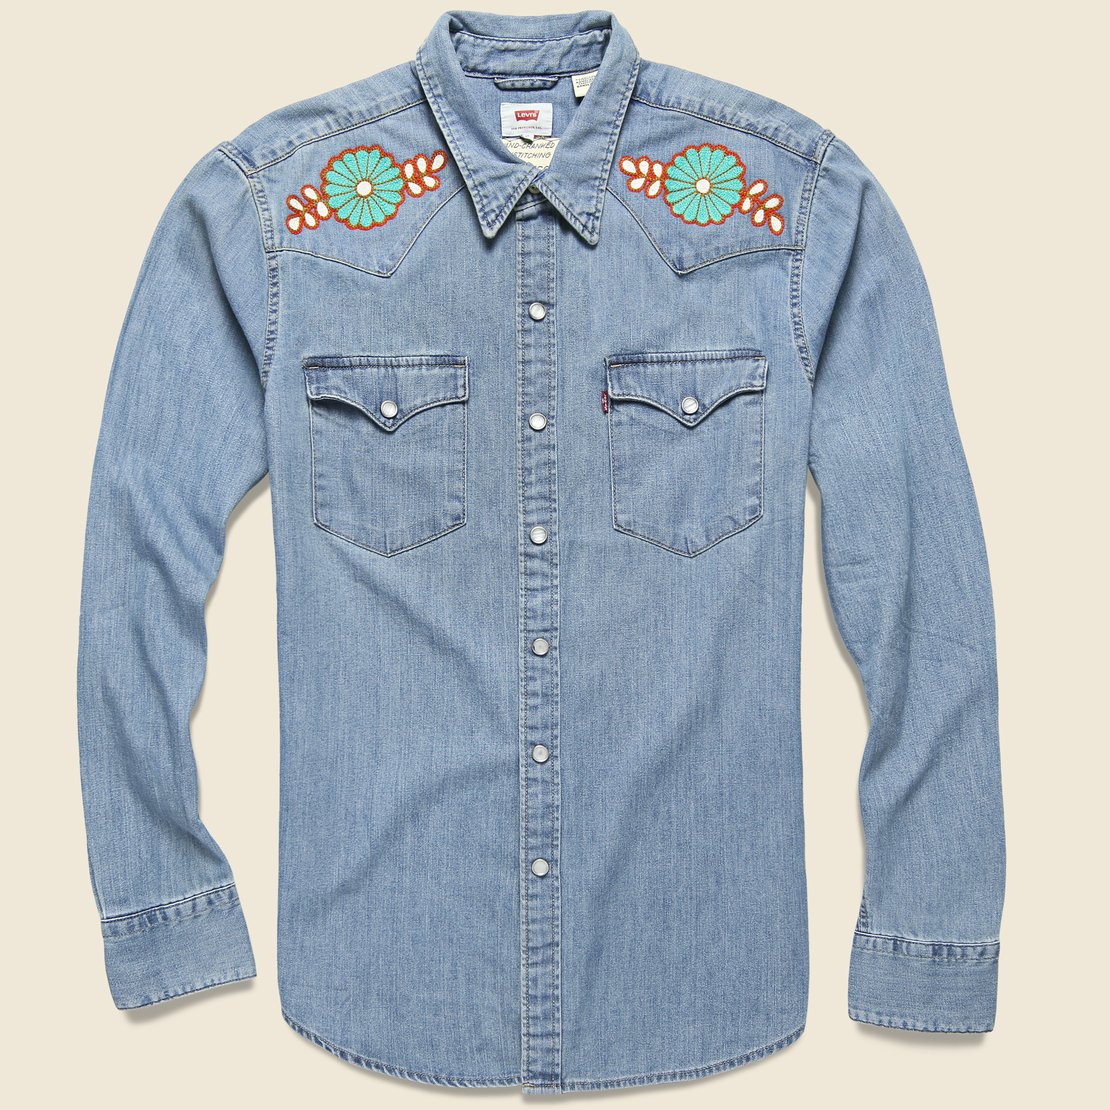 Fort Lonesome Levi's Barstow Western - Teal/Orange/White Flowers